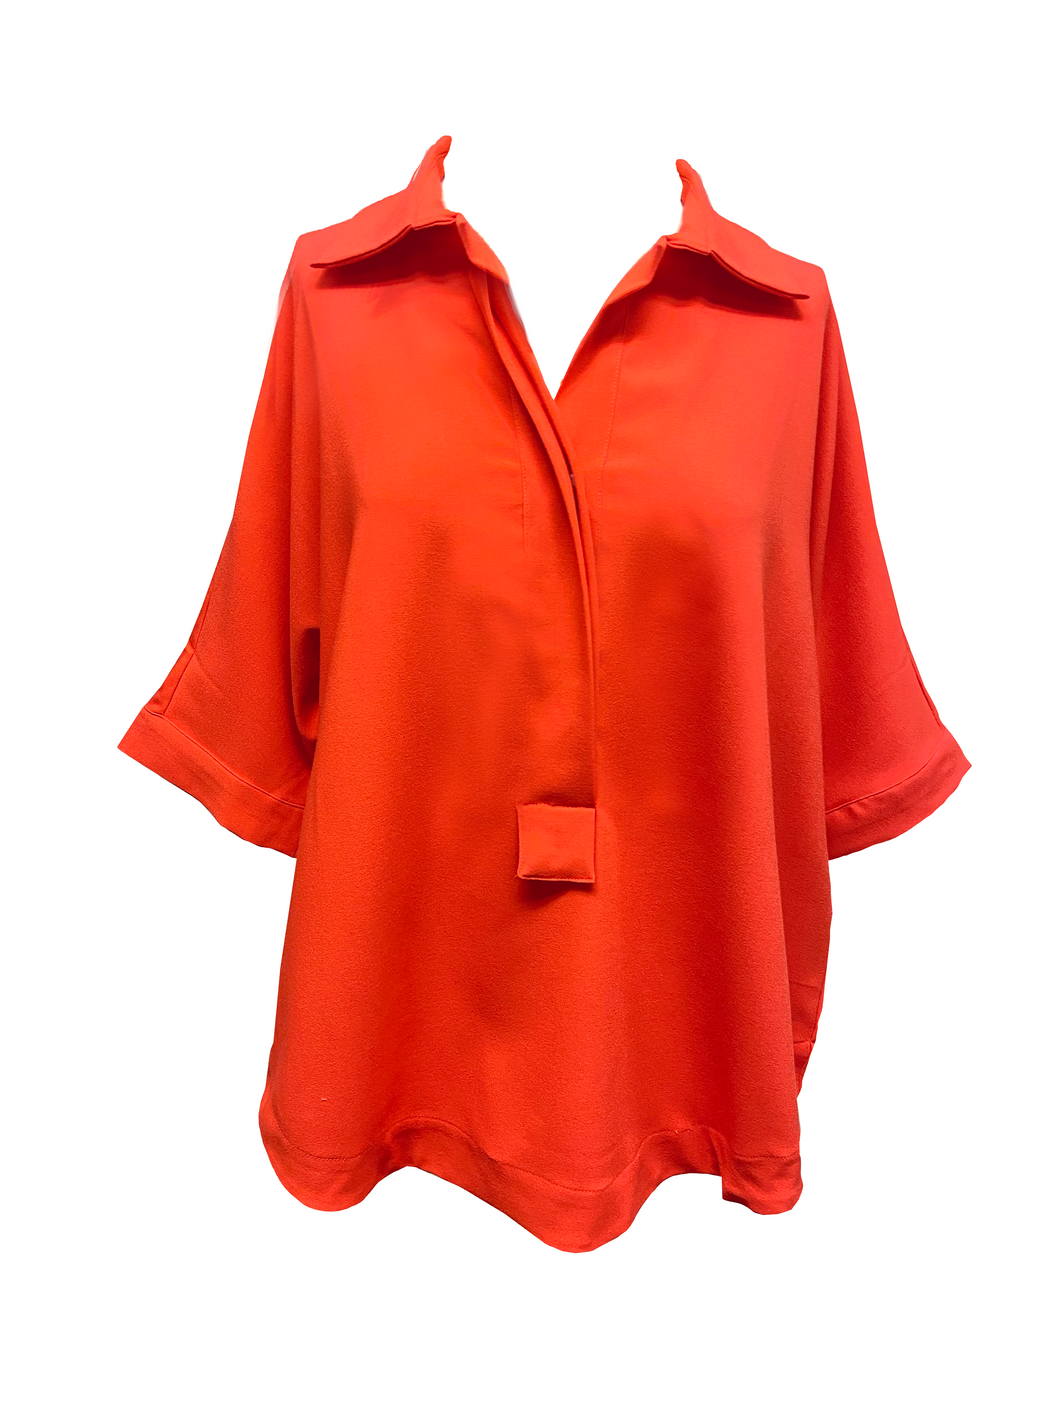 Evelyne Talman | One Size Fits Most Coral Crepe